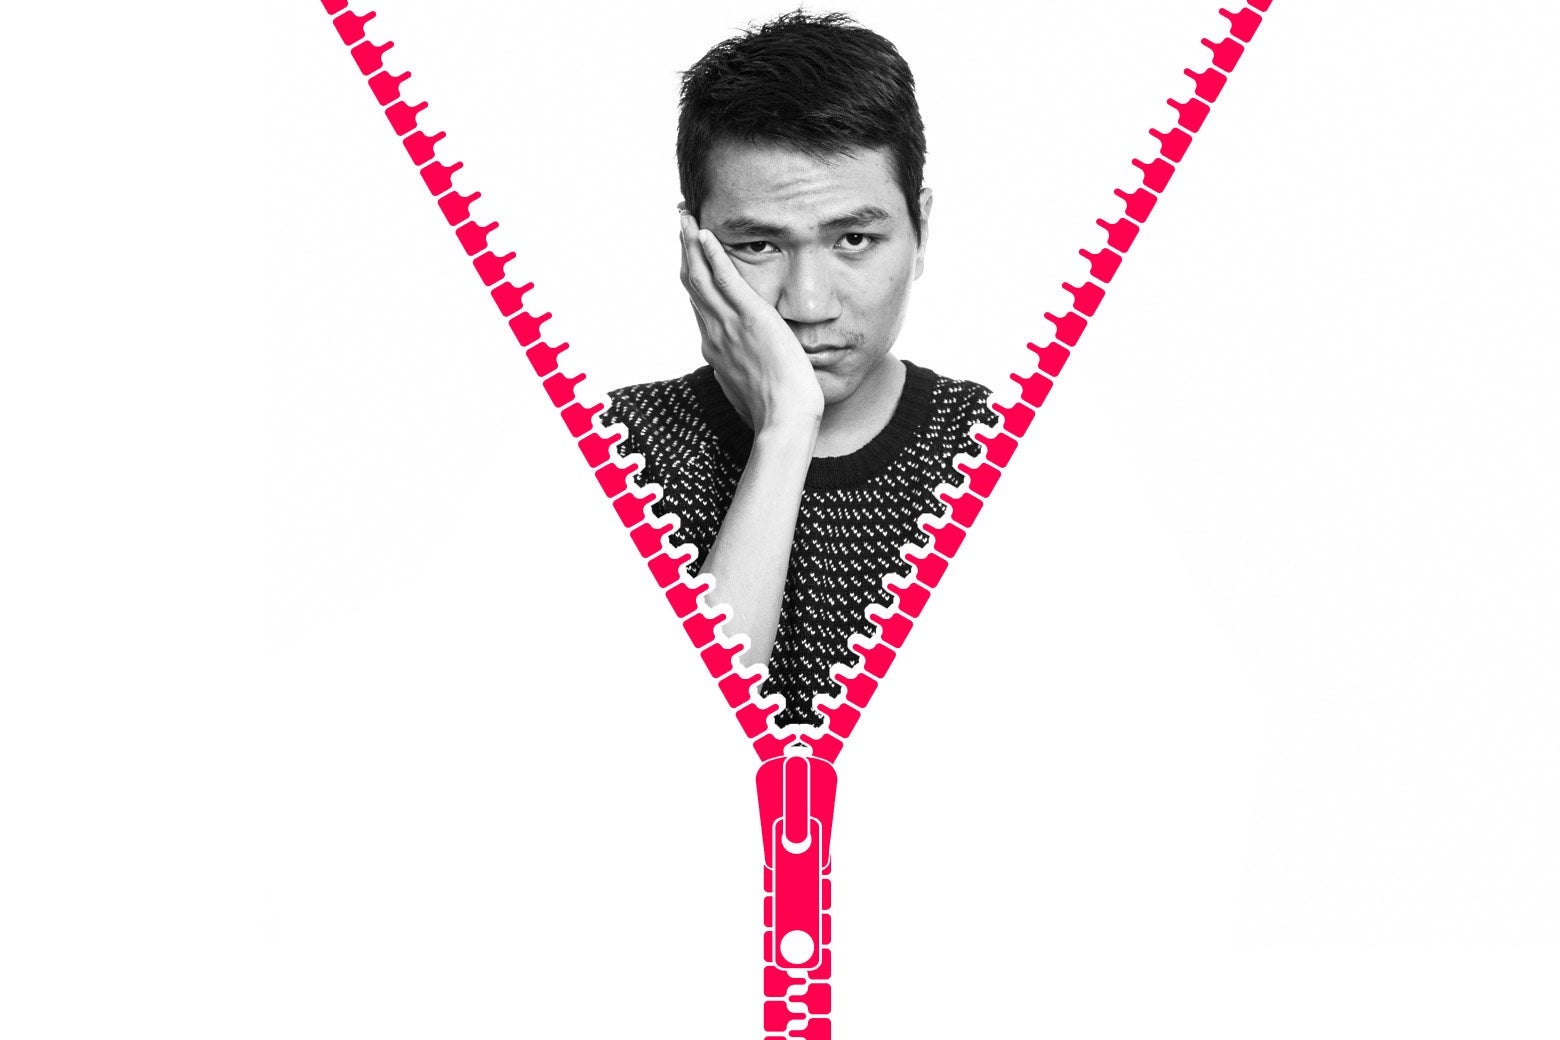 A man looking glum above a graphic of a zipper being pulled up